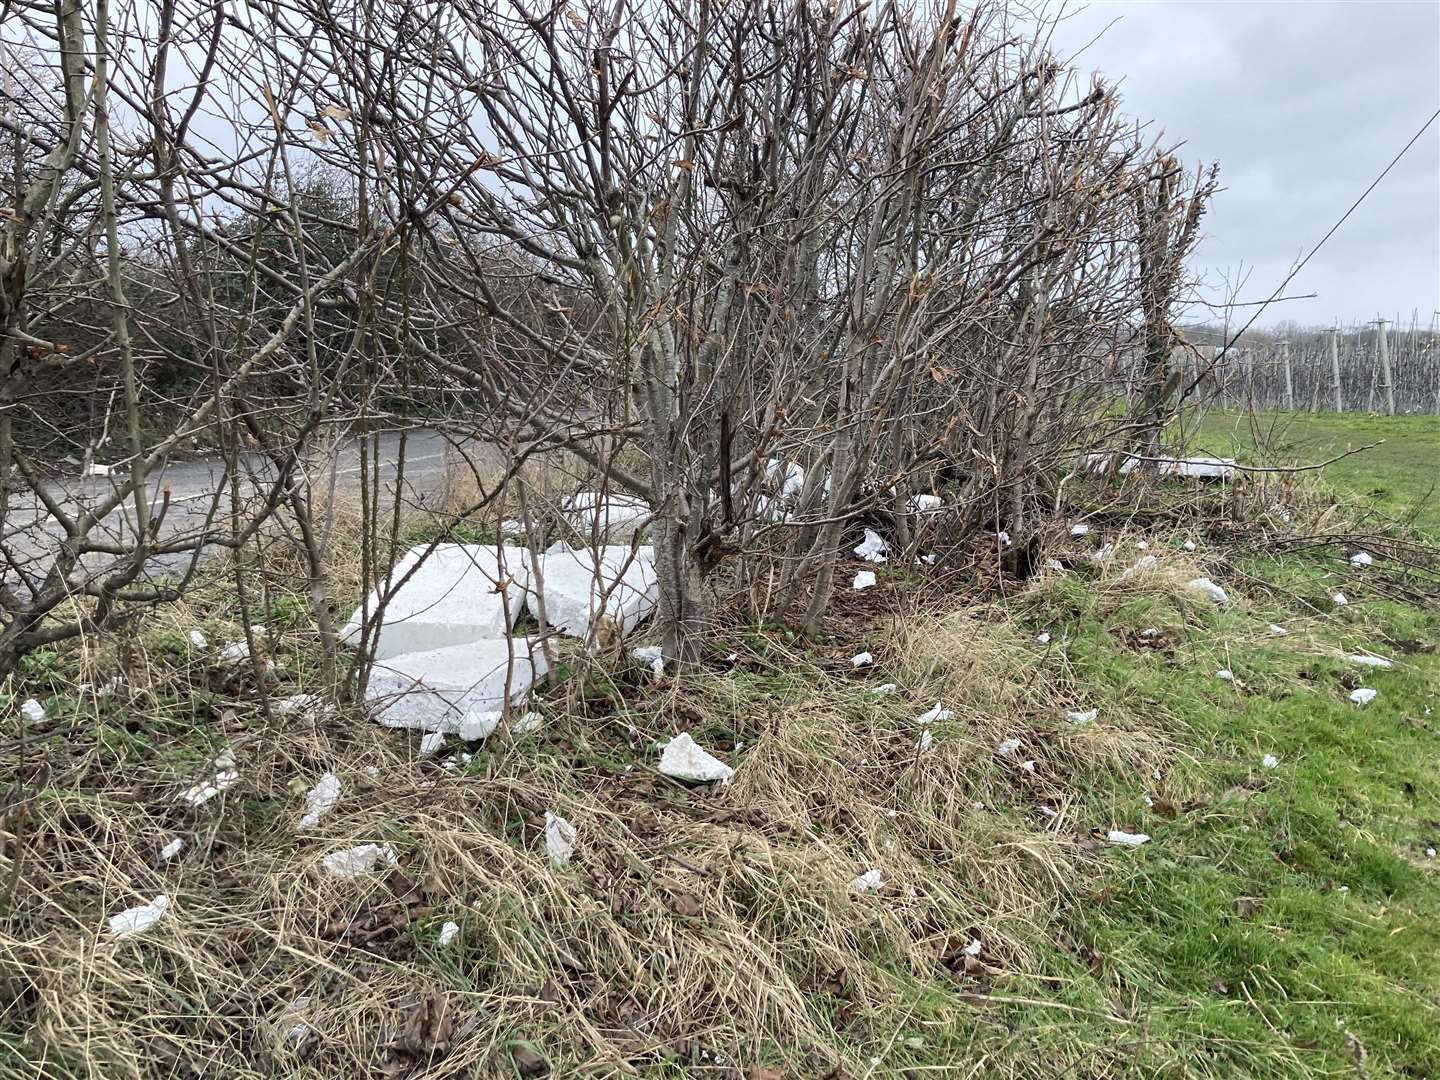 Polystyrene and plastic blown into verges and trees in Rainham.